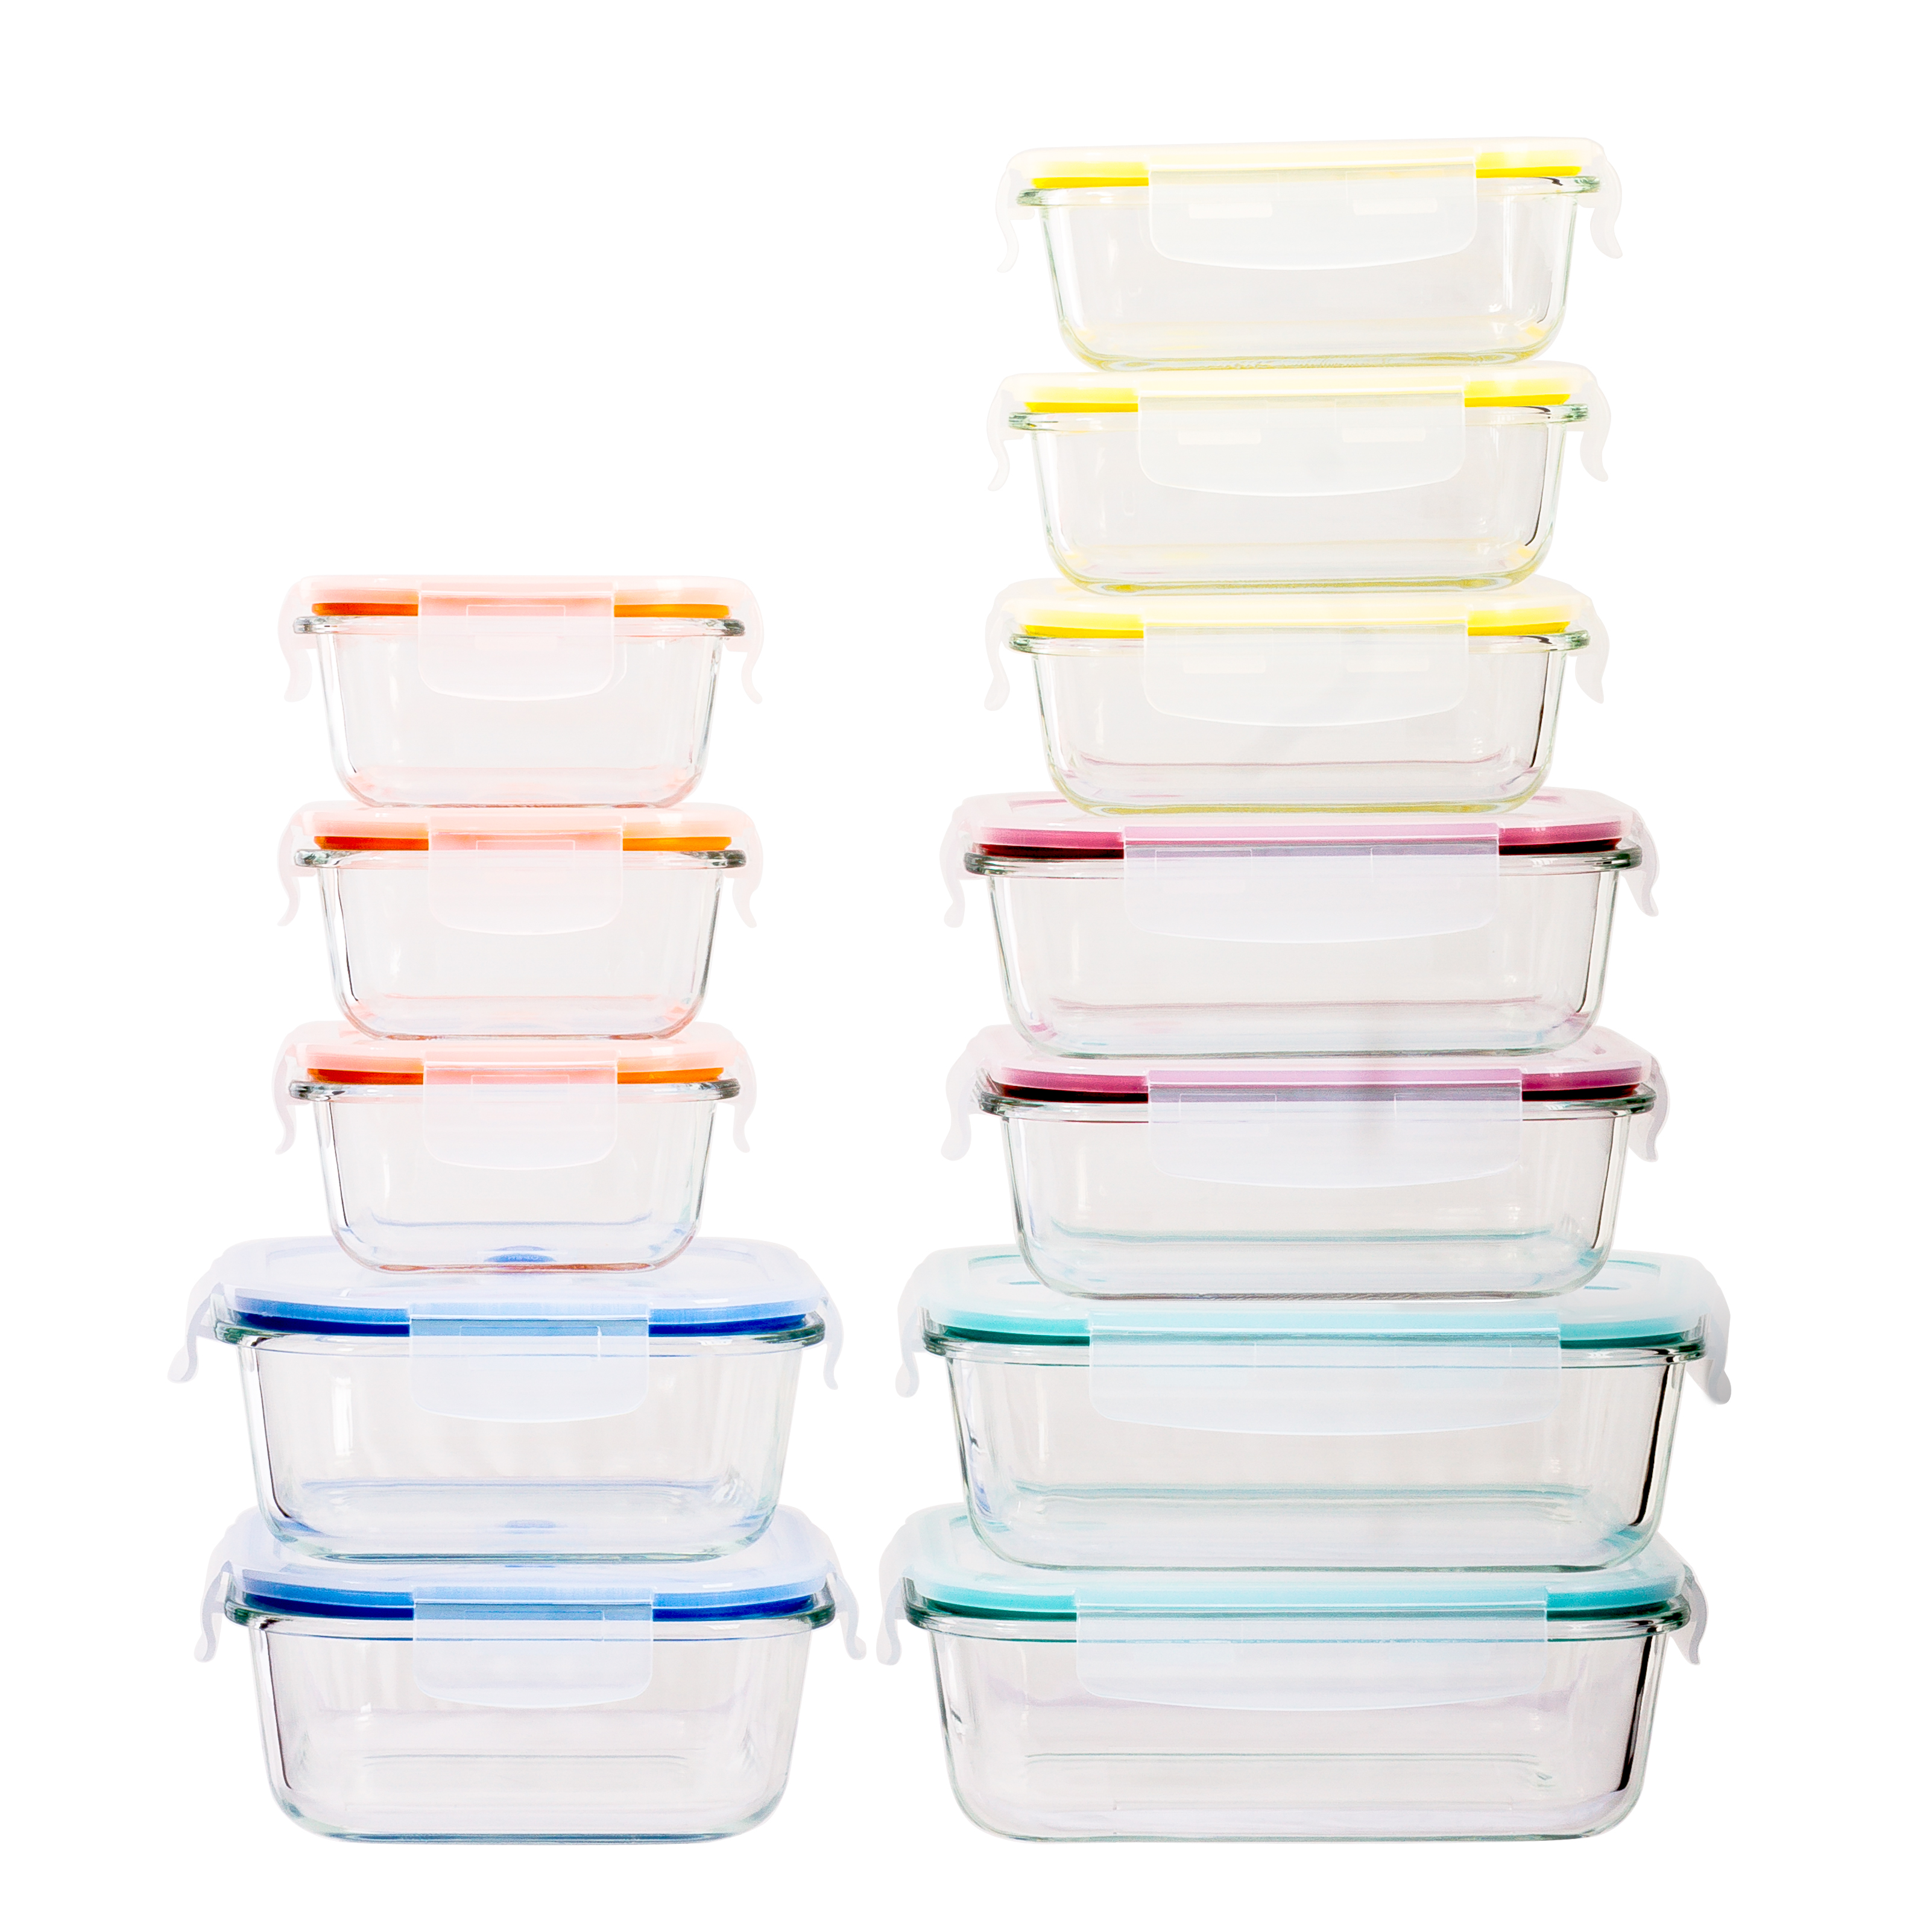 Imperial Home 24 pcs. Glass Meal Prep Storage Container Set W/ Snap Locking Lid - image 1 of 8